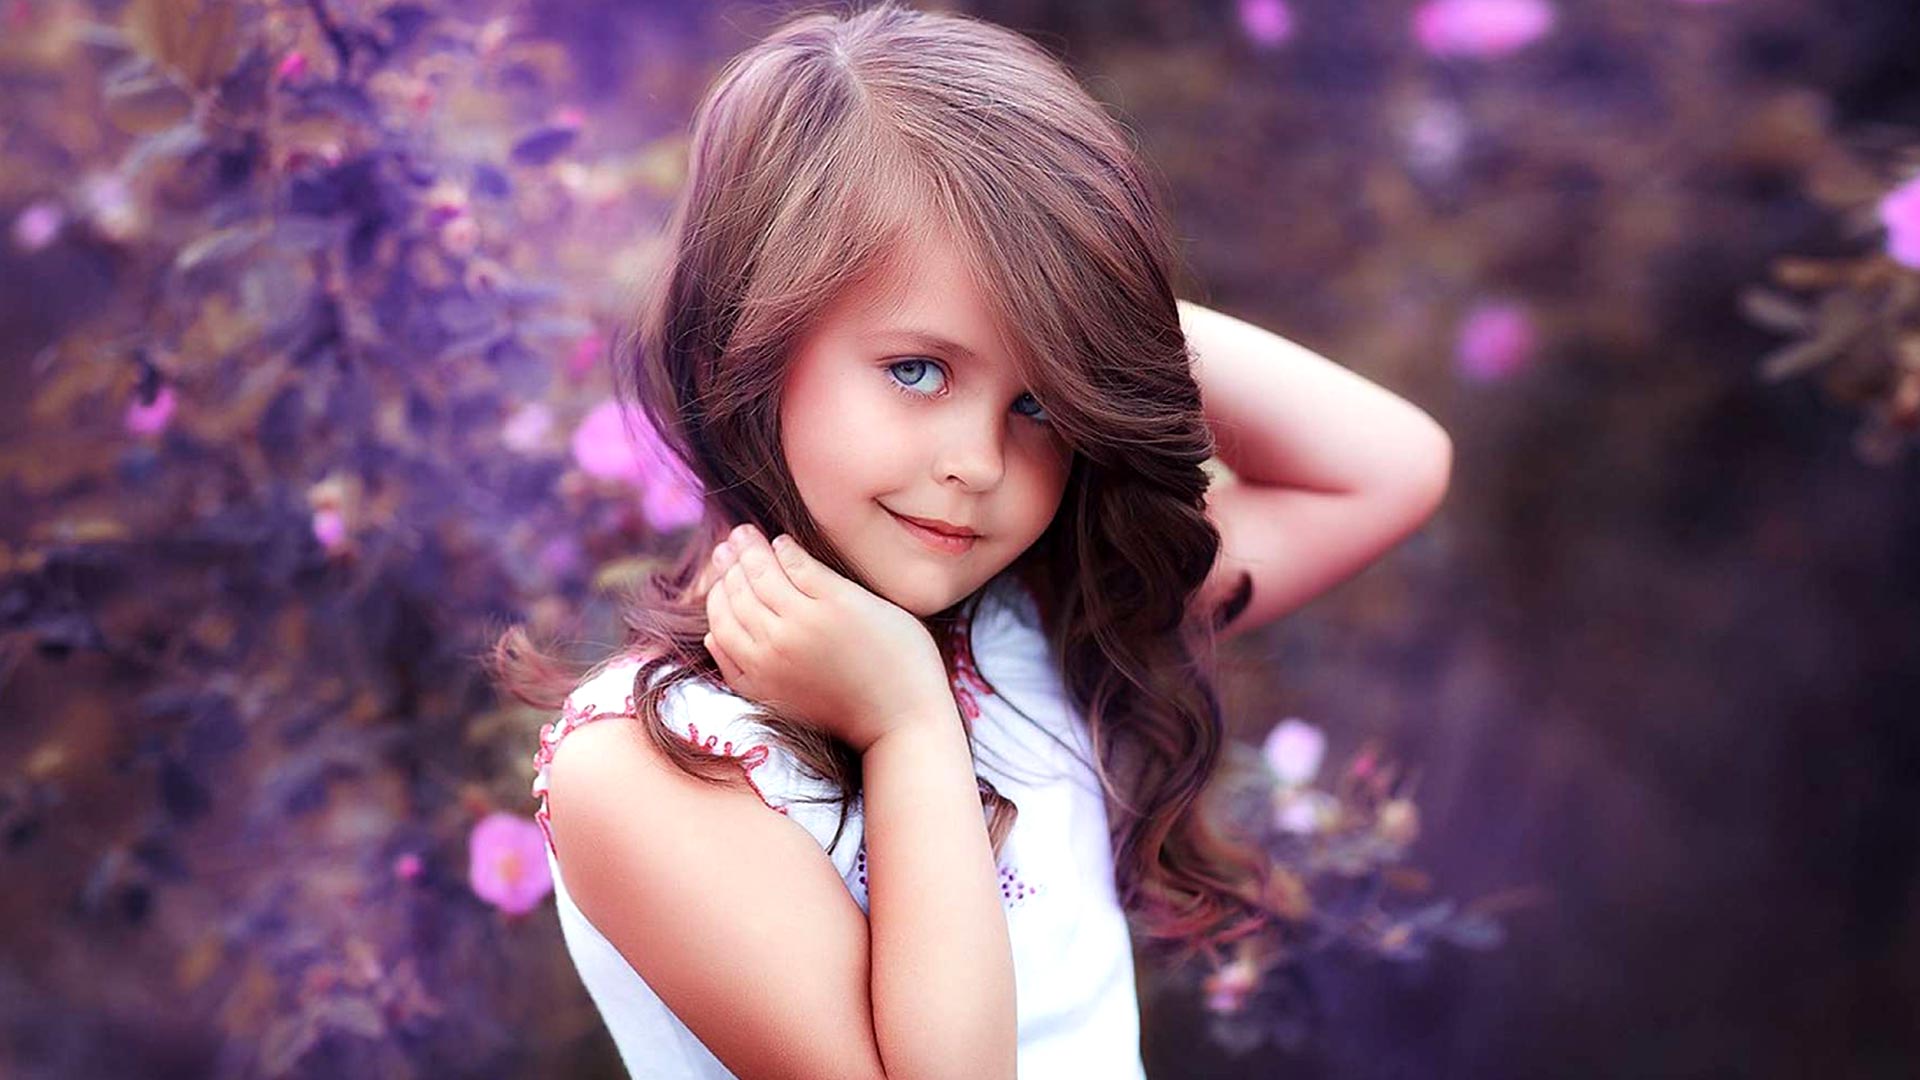 Free download Sweet Baby Girl Wallpaper [1920x1080] for your Desktop, Mobile & Tablet. Explore Nature Wallpaper Cute Babies Wallpaper. Cute Babies Wallpaper Free Download, Smiling Cute Babies Wallpaper, Cute